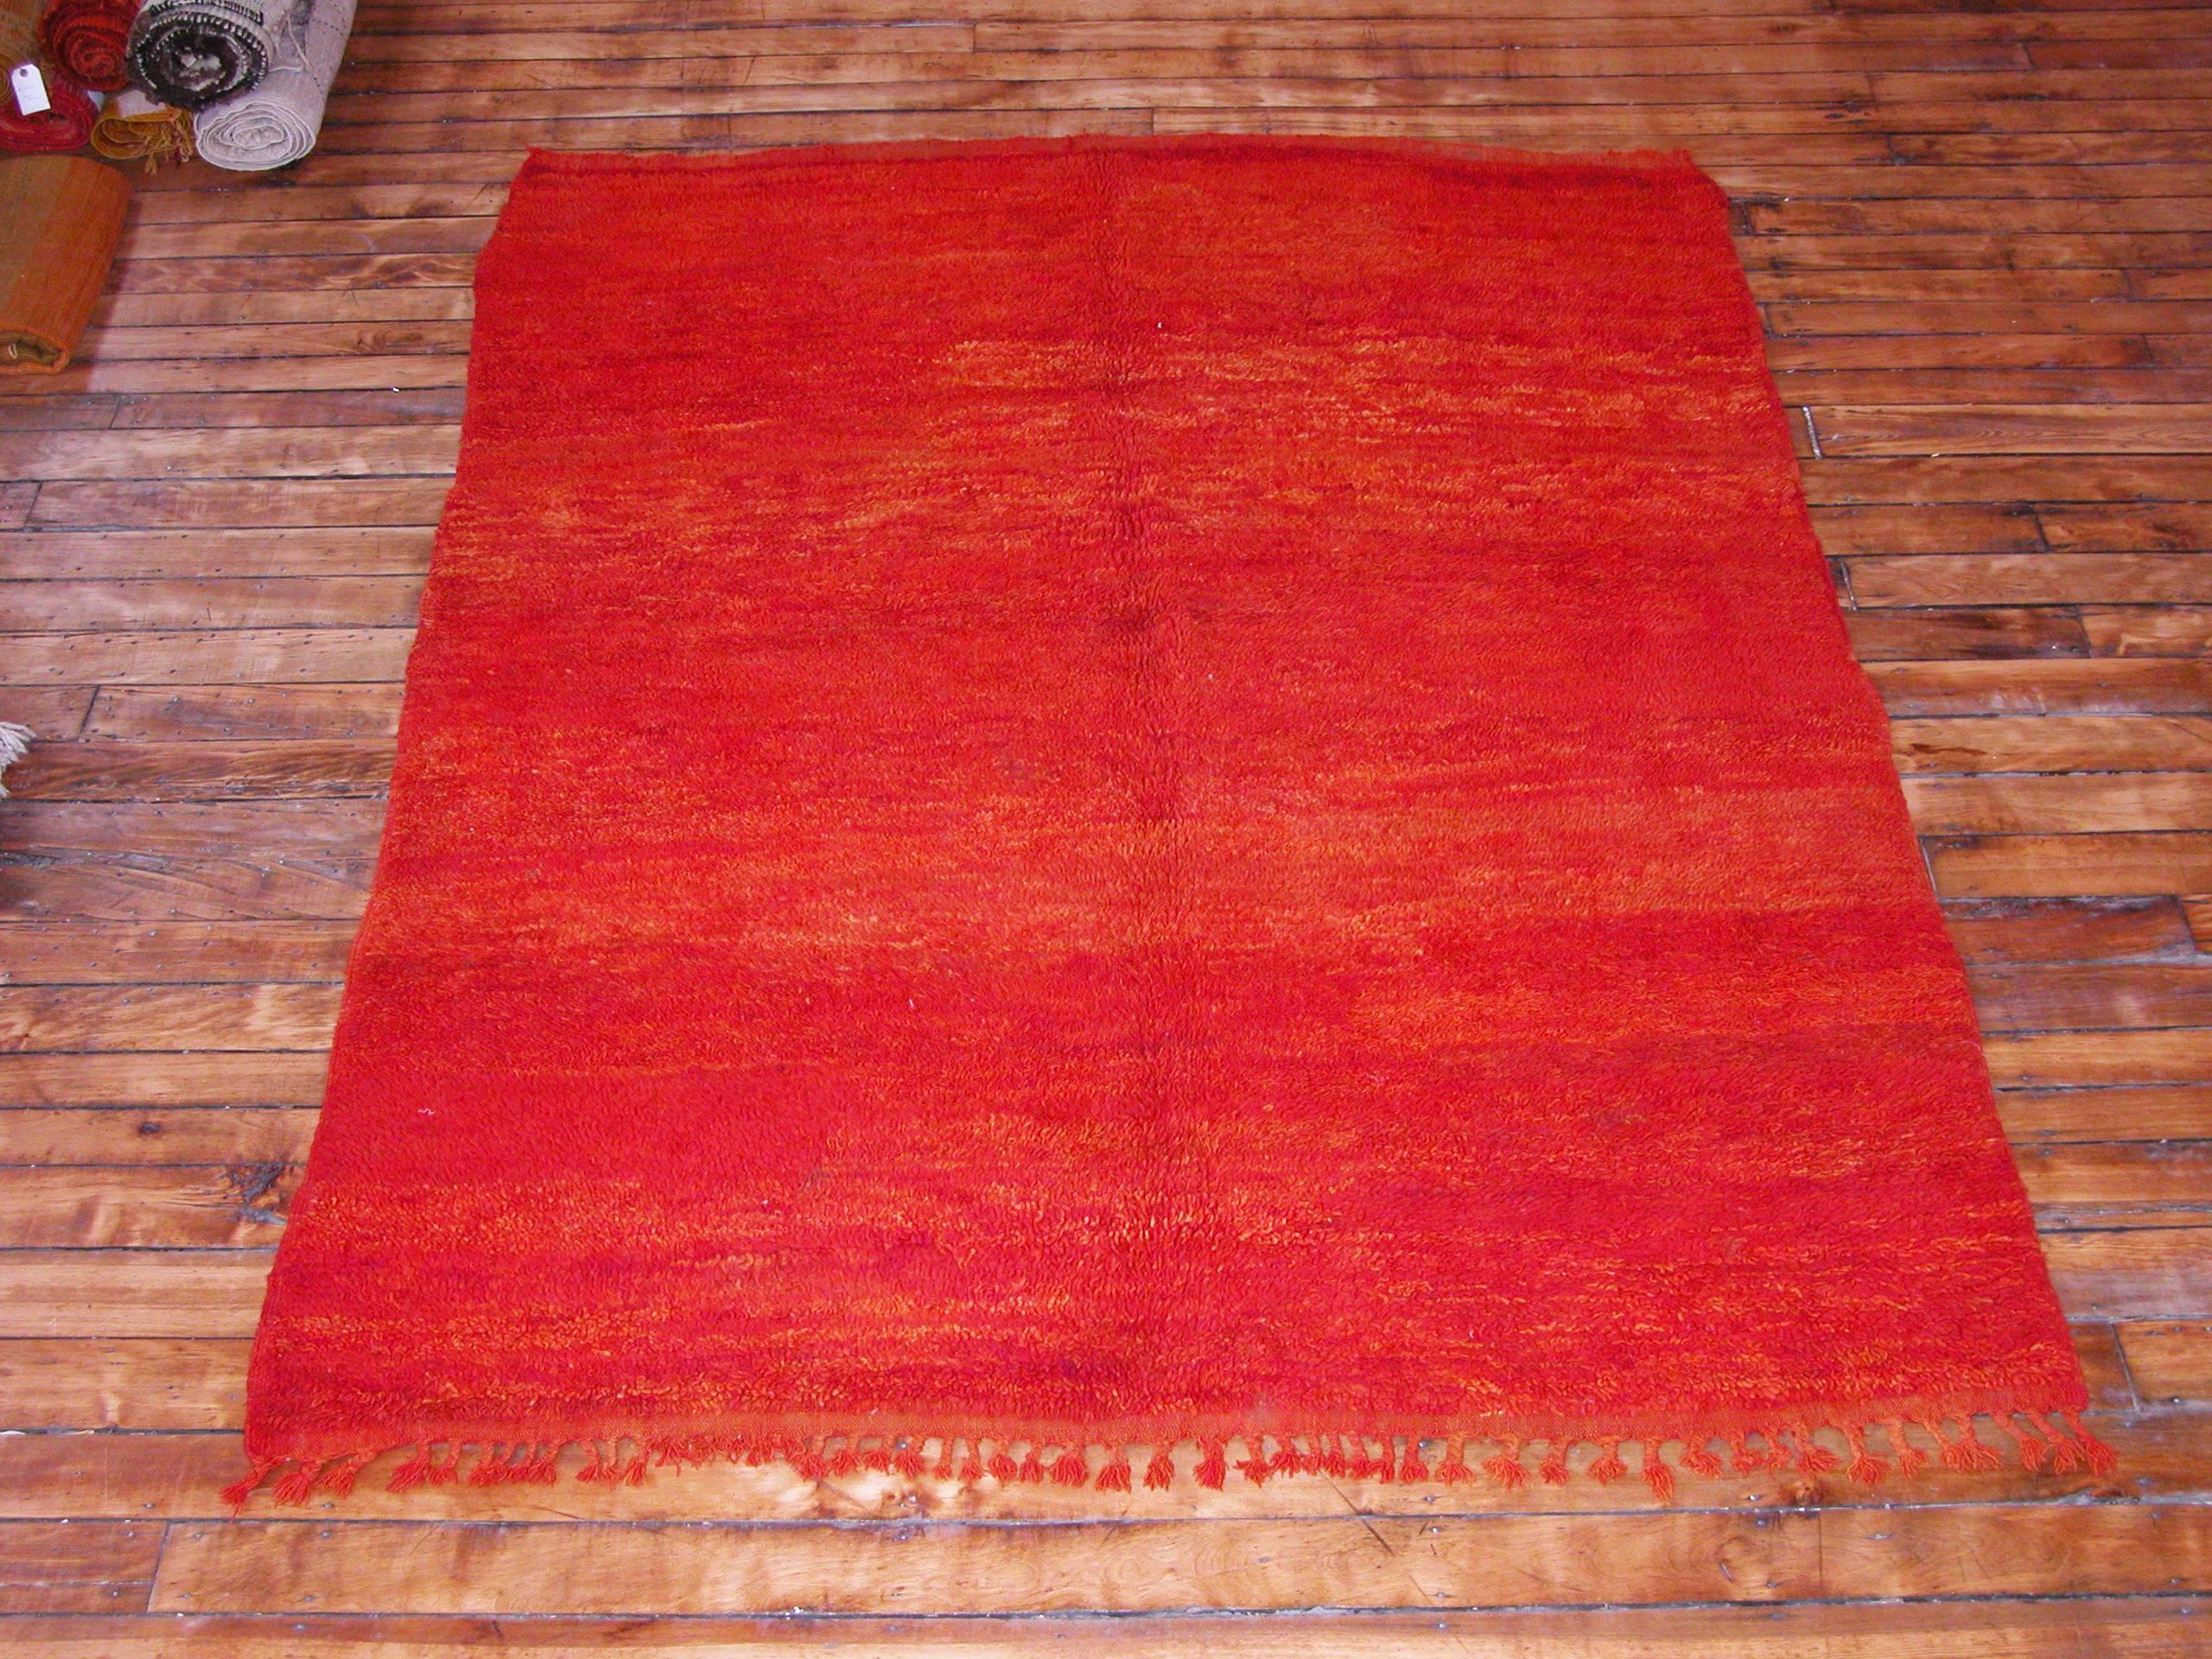 Vintage Aut Sgougou Moroccan rug, circa 1950. Hand-knotted wool, size, 5'8